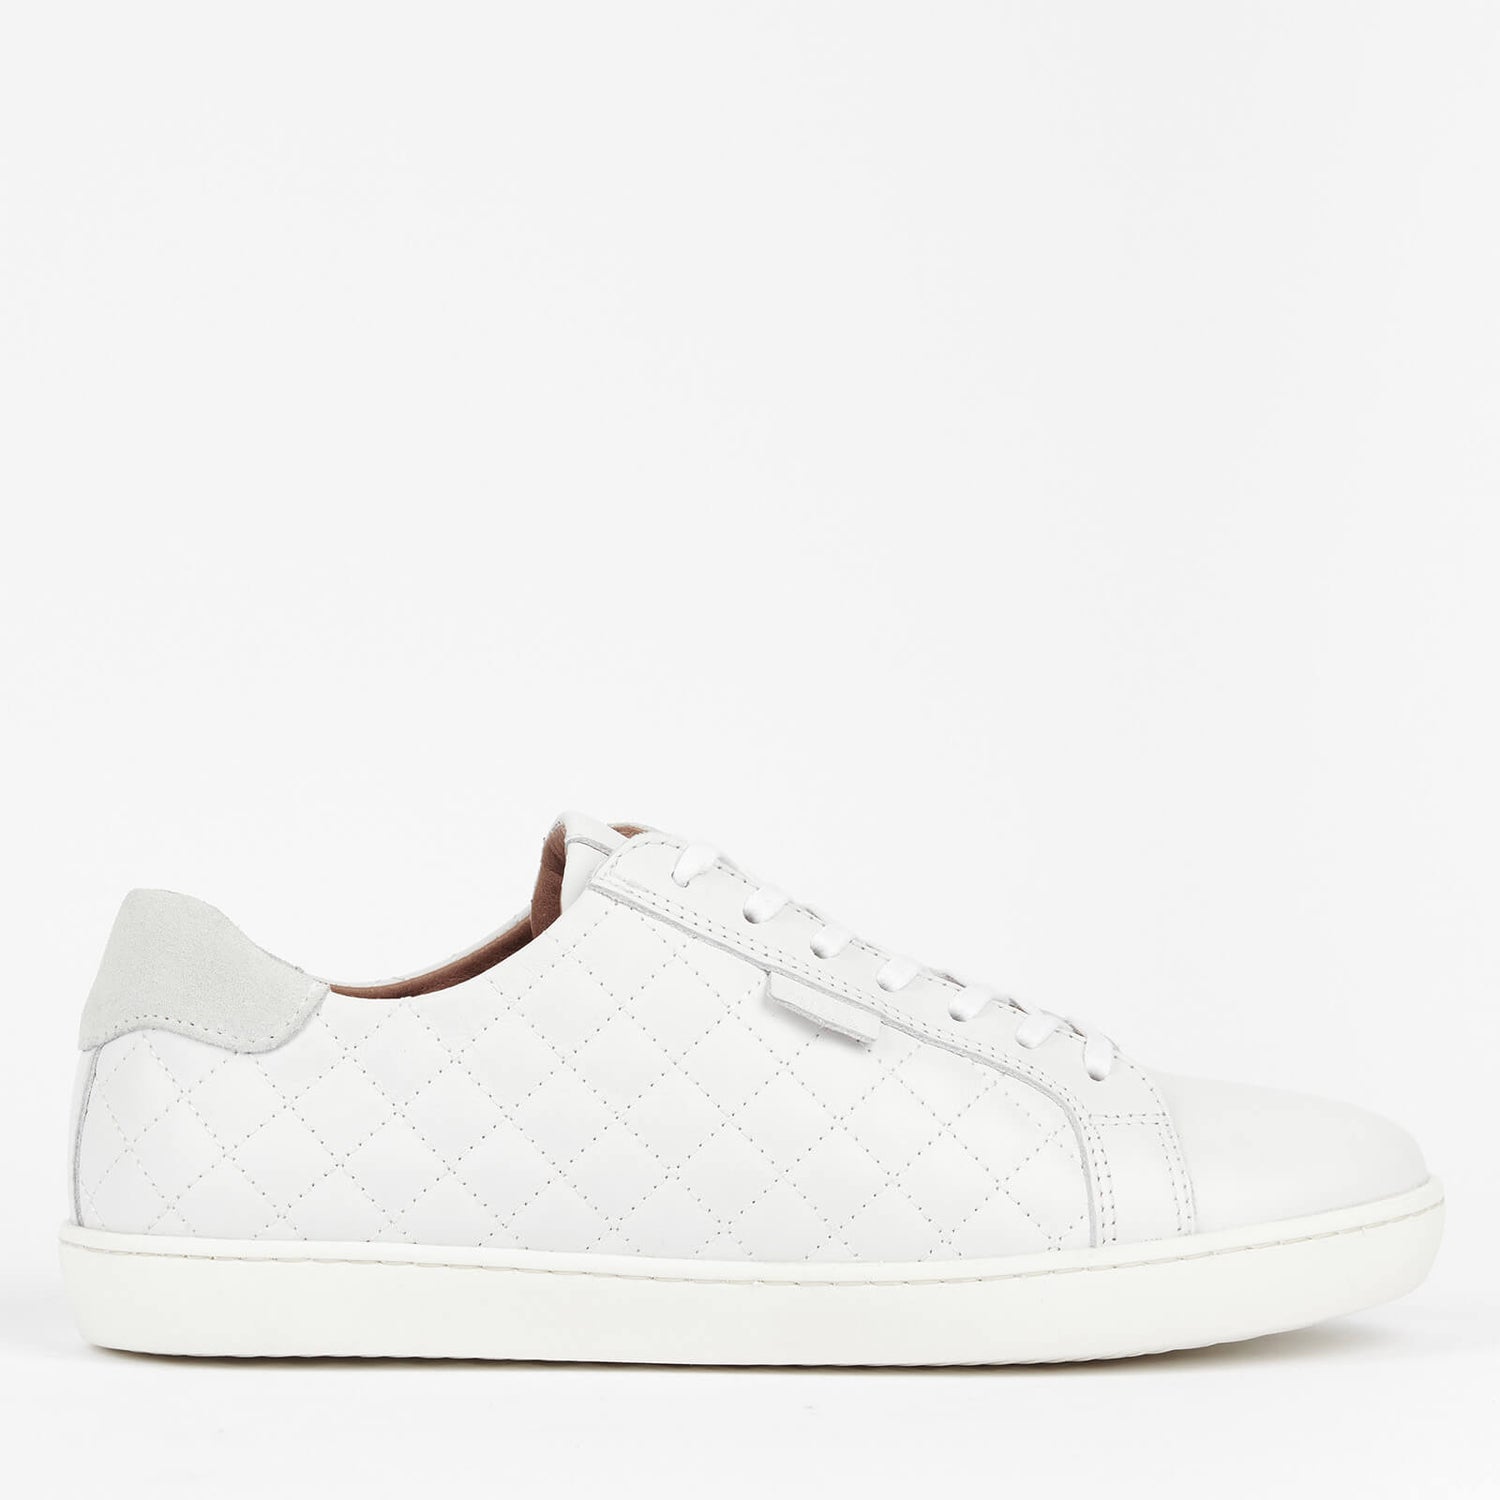 Barbour Women's Bridget Leather Low Top Trainers - White - UK 3